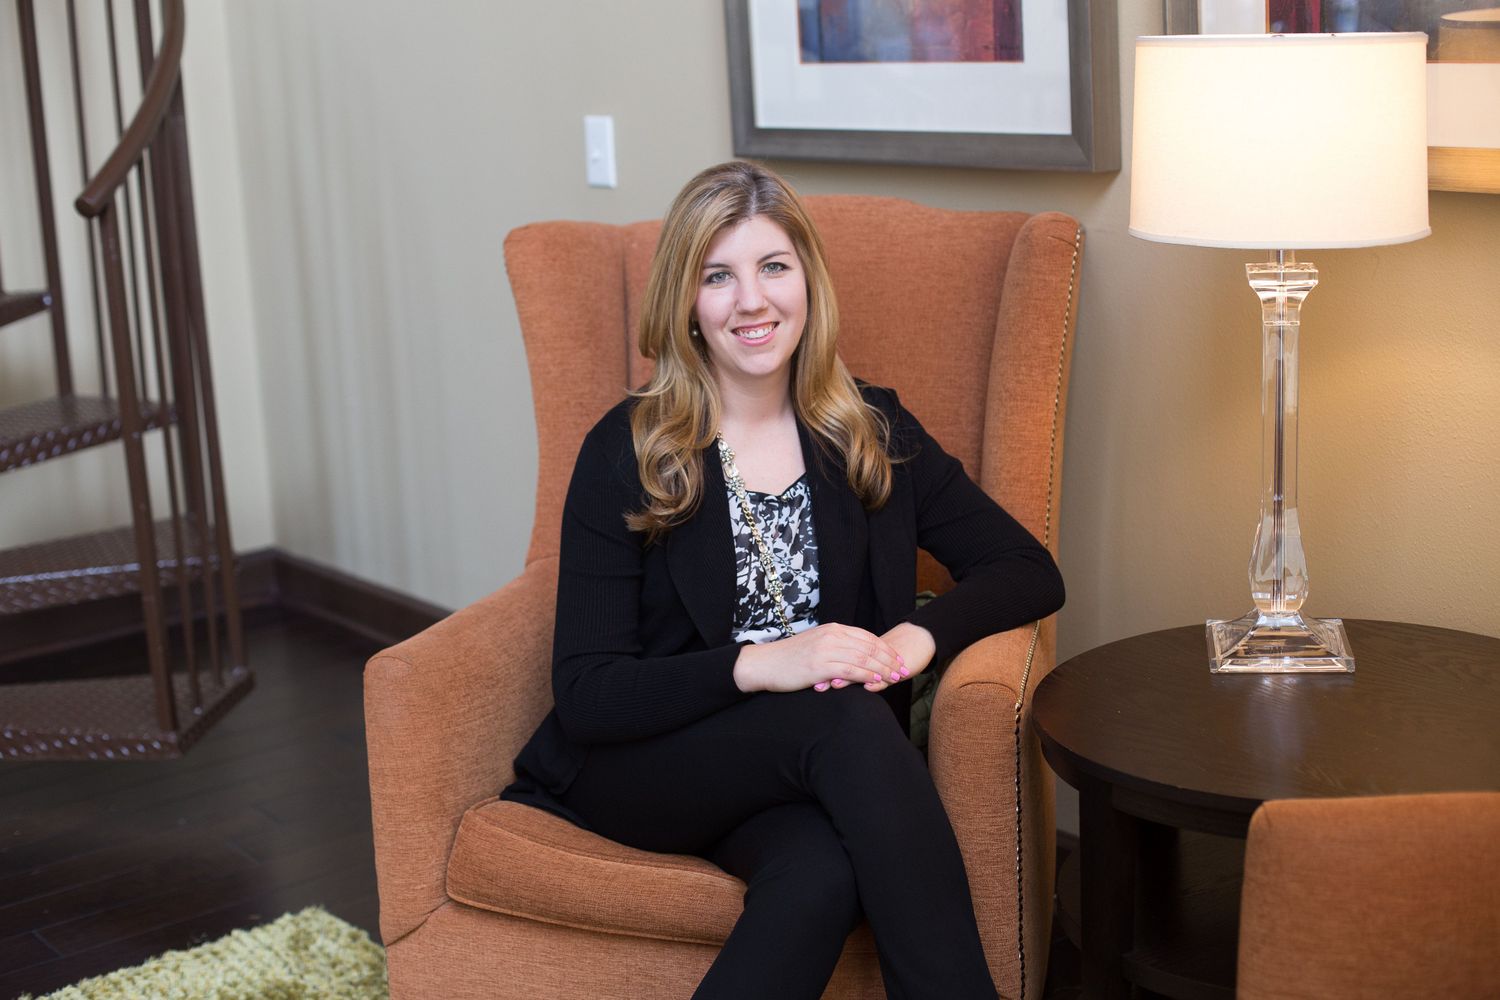 Gallery Photo of Leah Clionsky, Ph.D., Certified PCIT Therapist & Level II Texas Regional Trainer
PCIT provided in: Texas, Florida, and all PSYPACT states